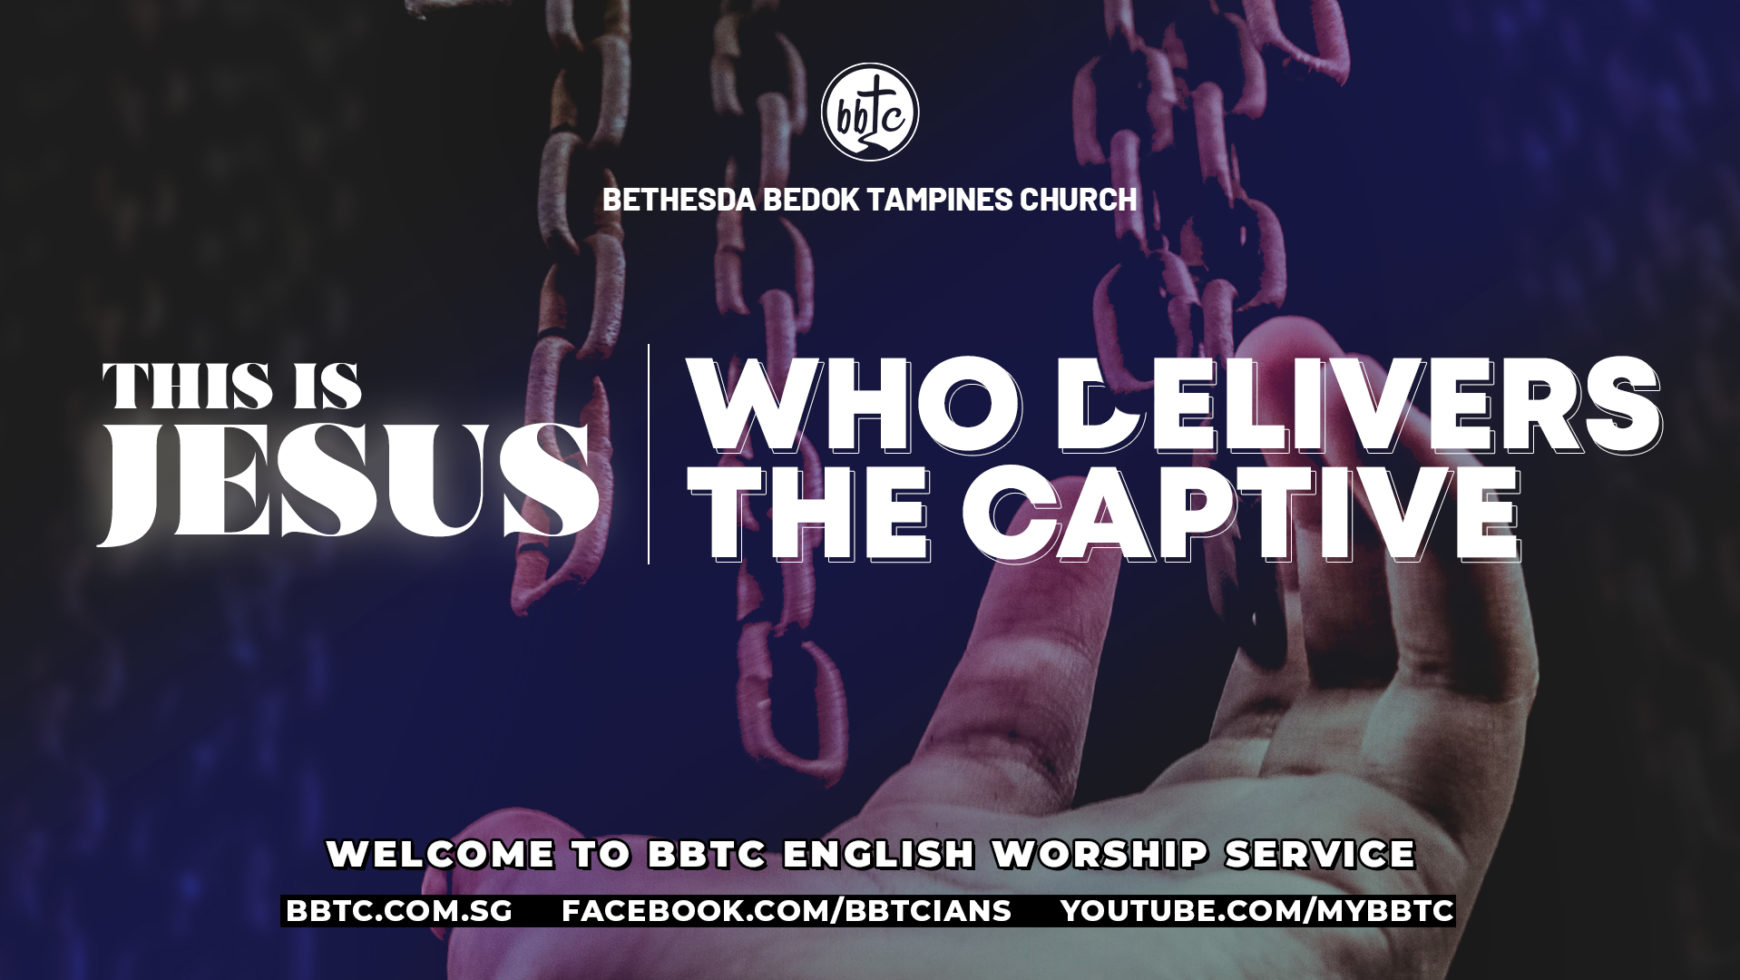 THIS IS JESUS WHO DELIVERS THE CAPTIVE